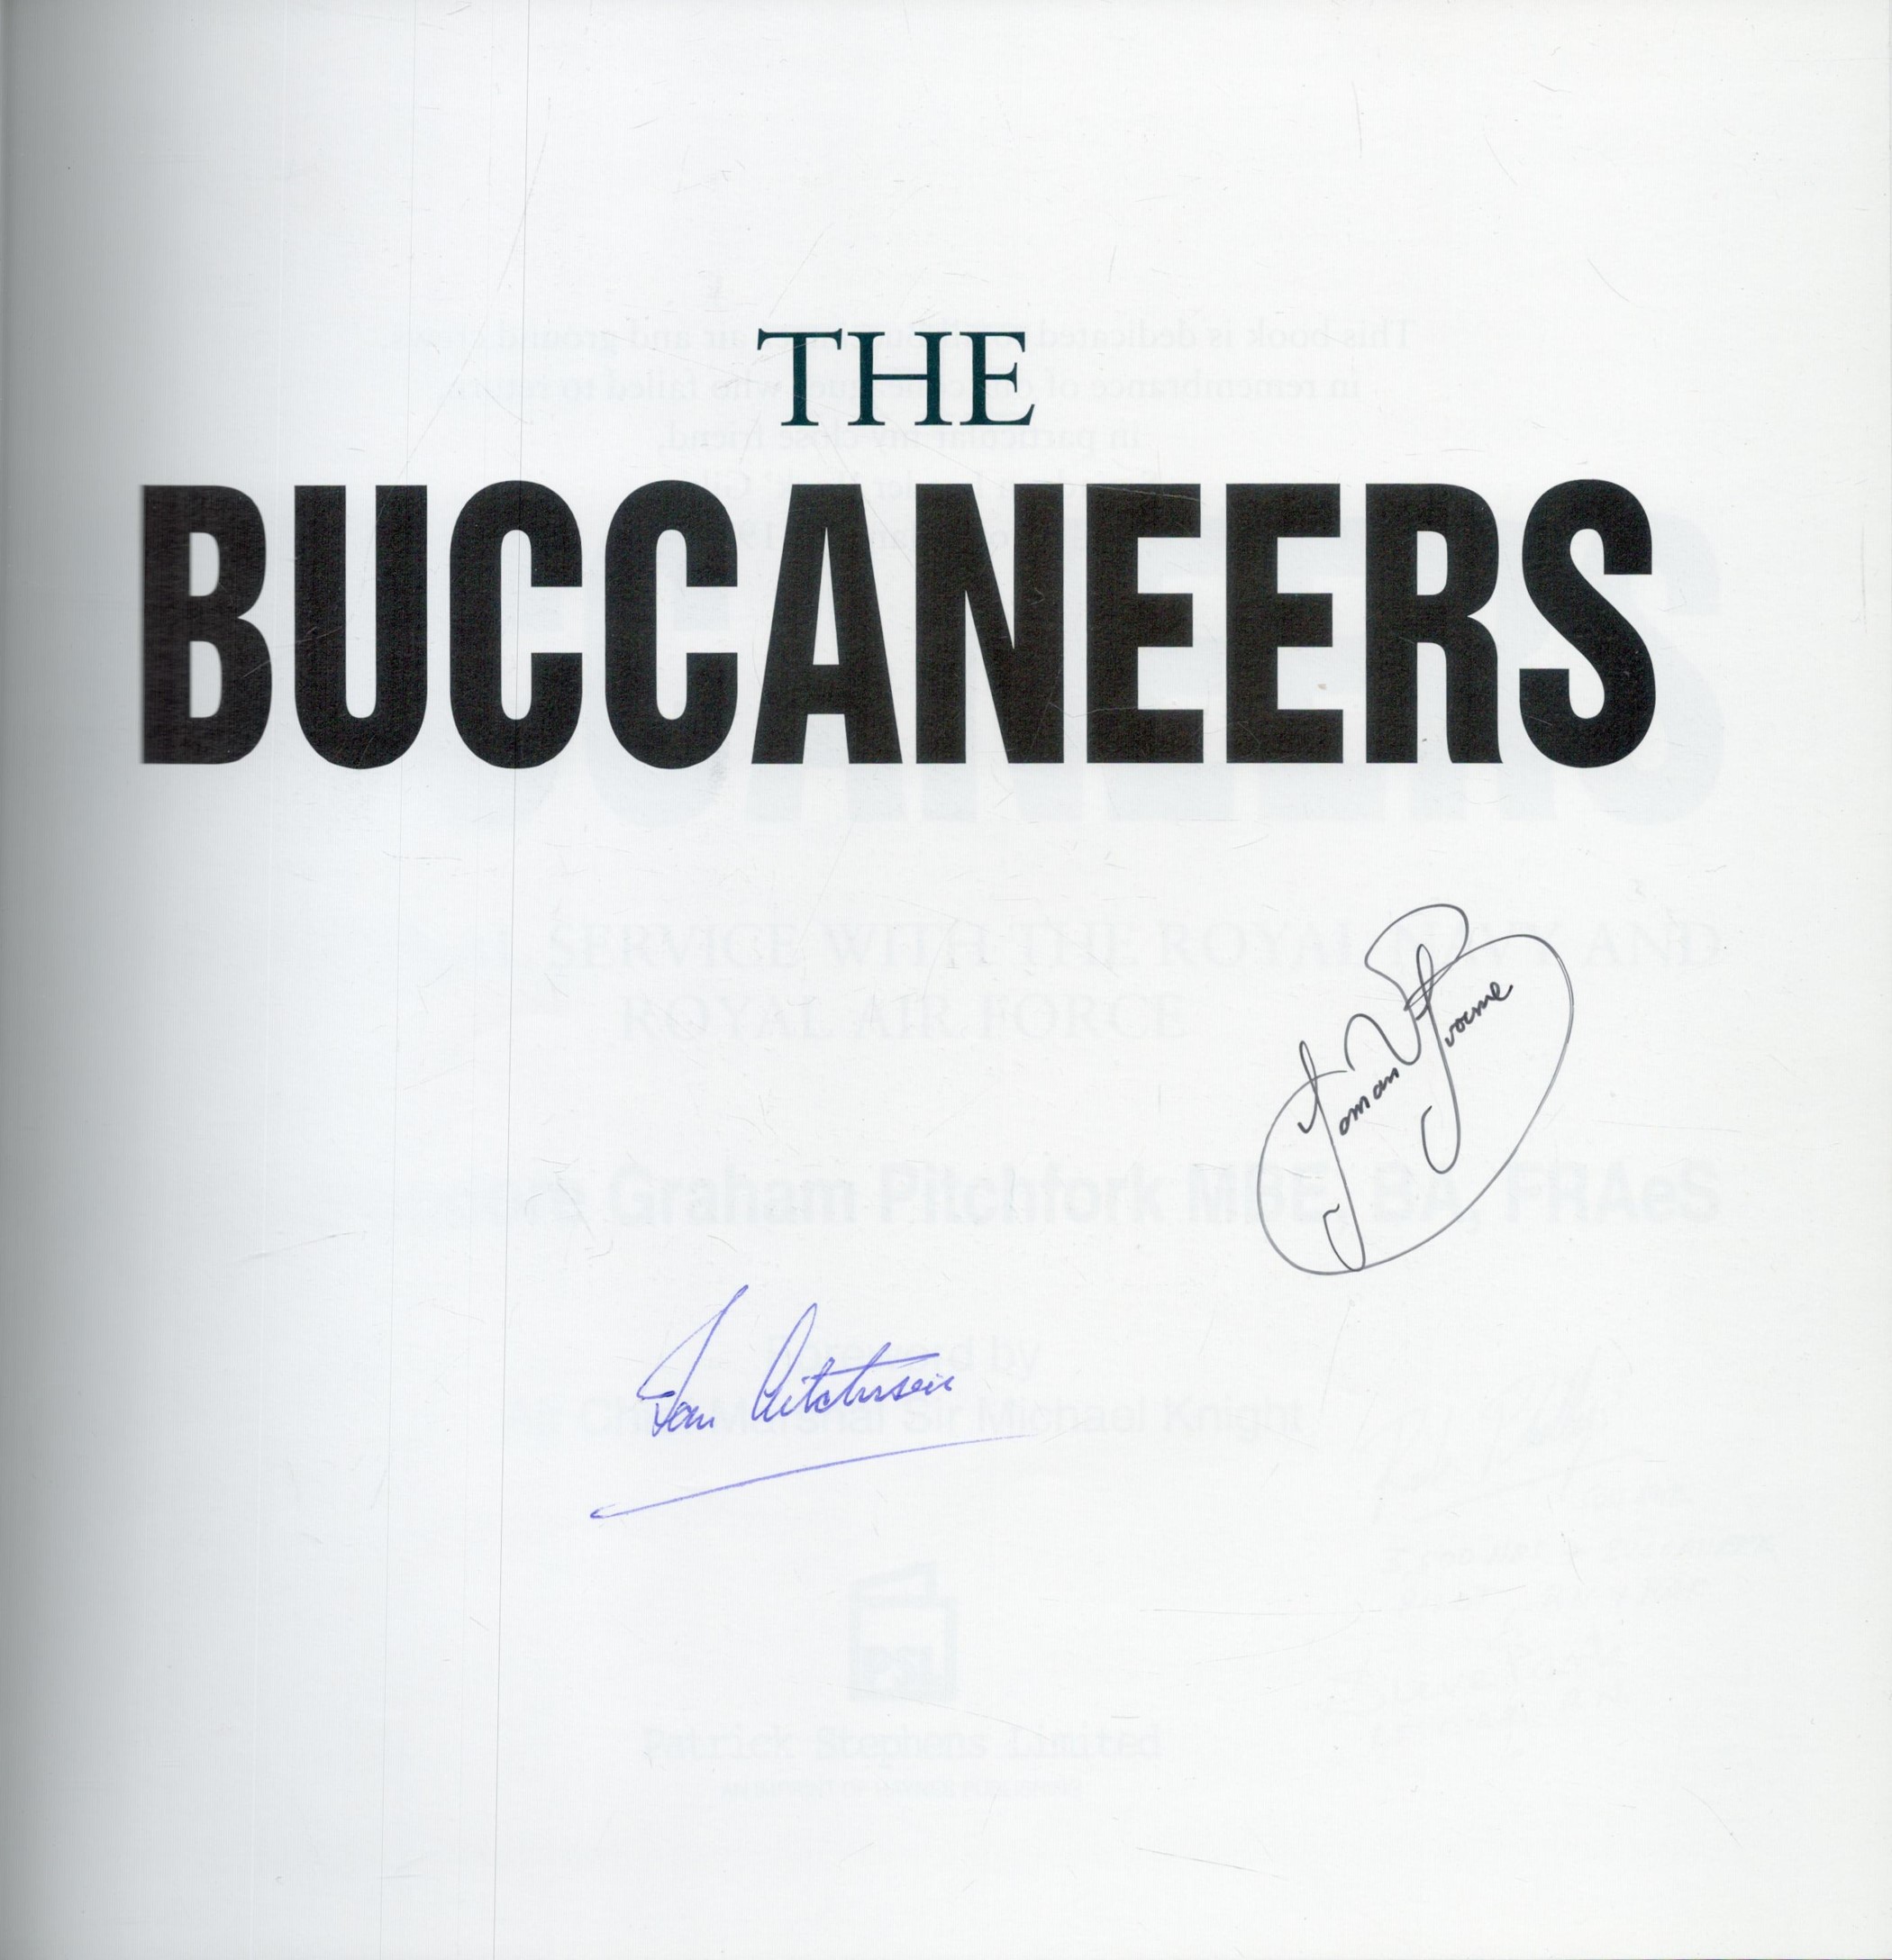 WW2 The Buccaneers by Air Commodore Graham Pitchfork Signed by 4 Veterans including Steve Park, - Image 2 of 4